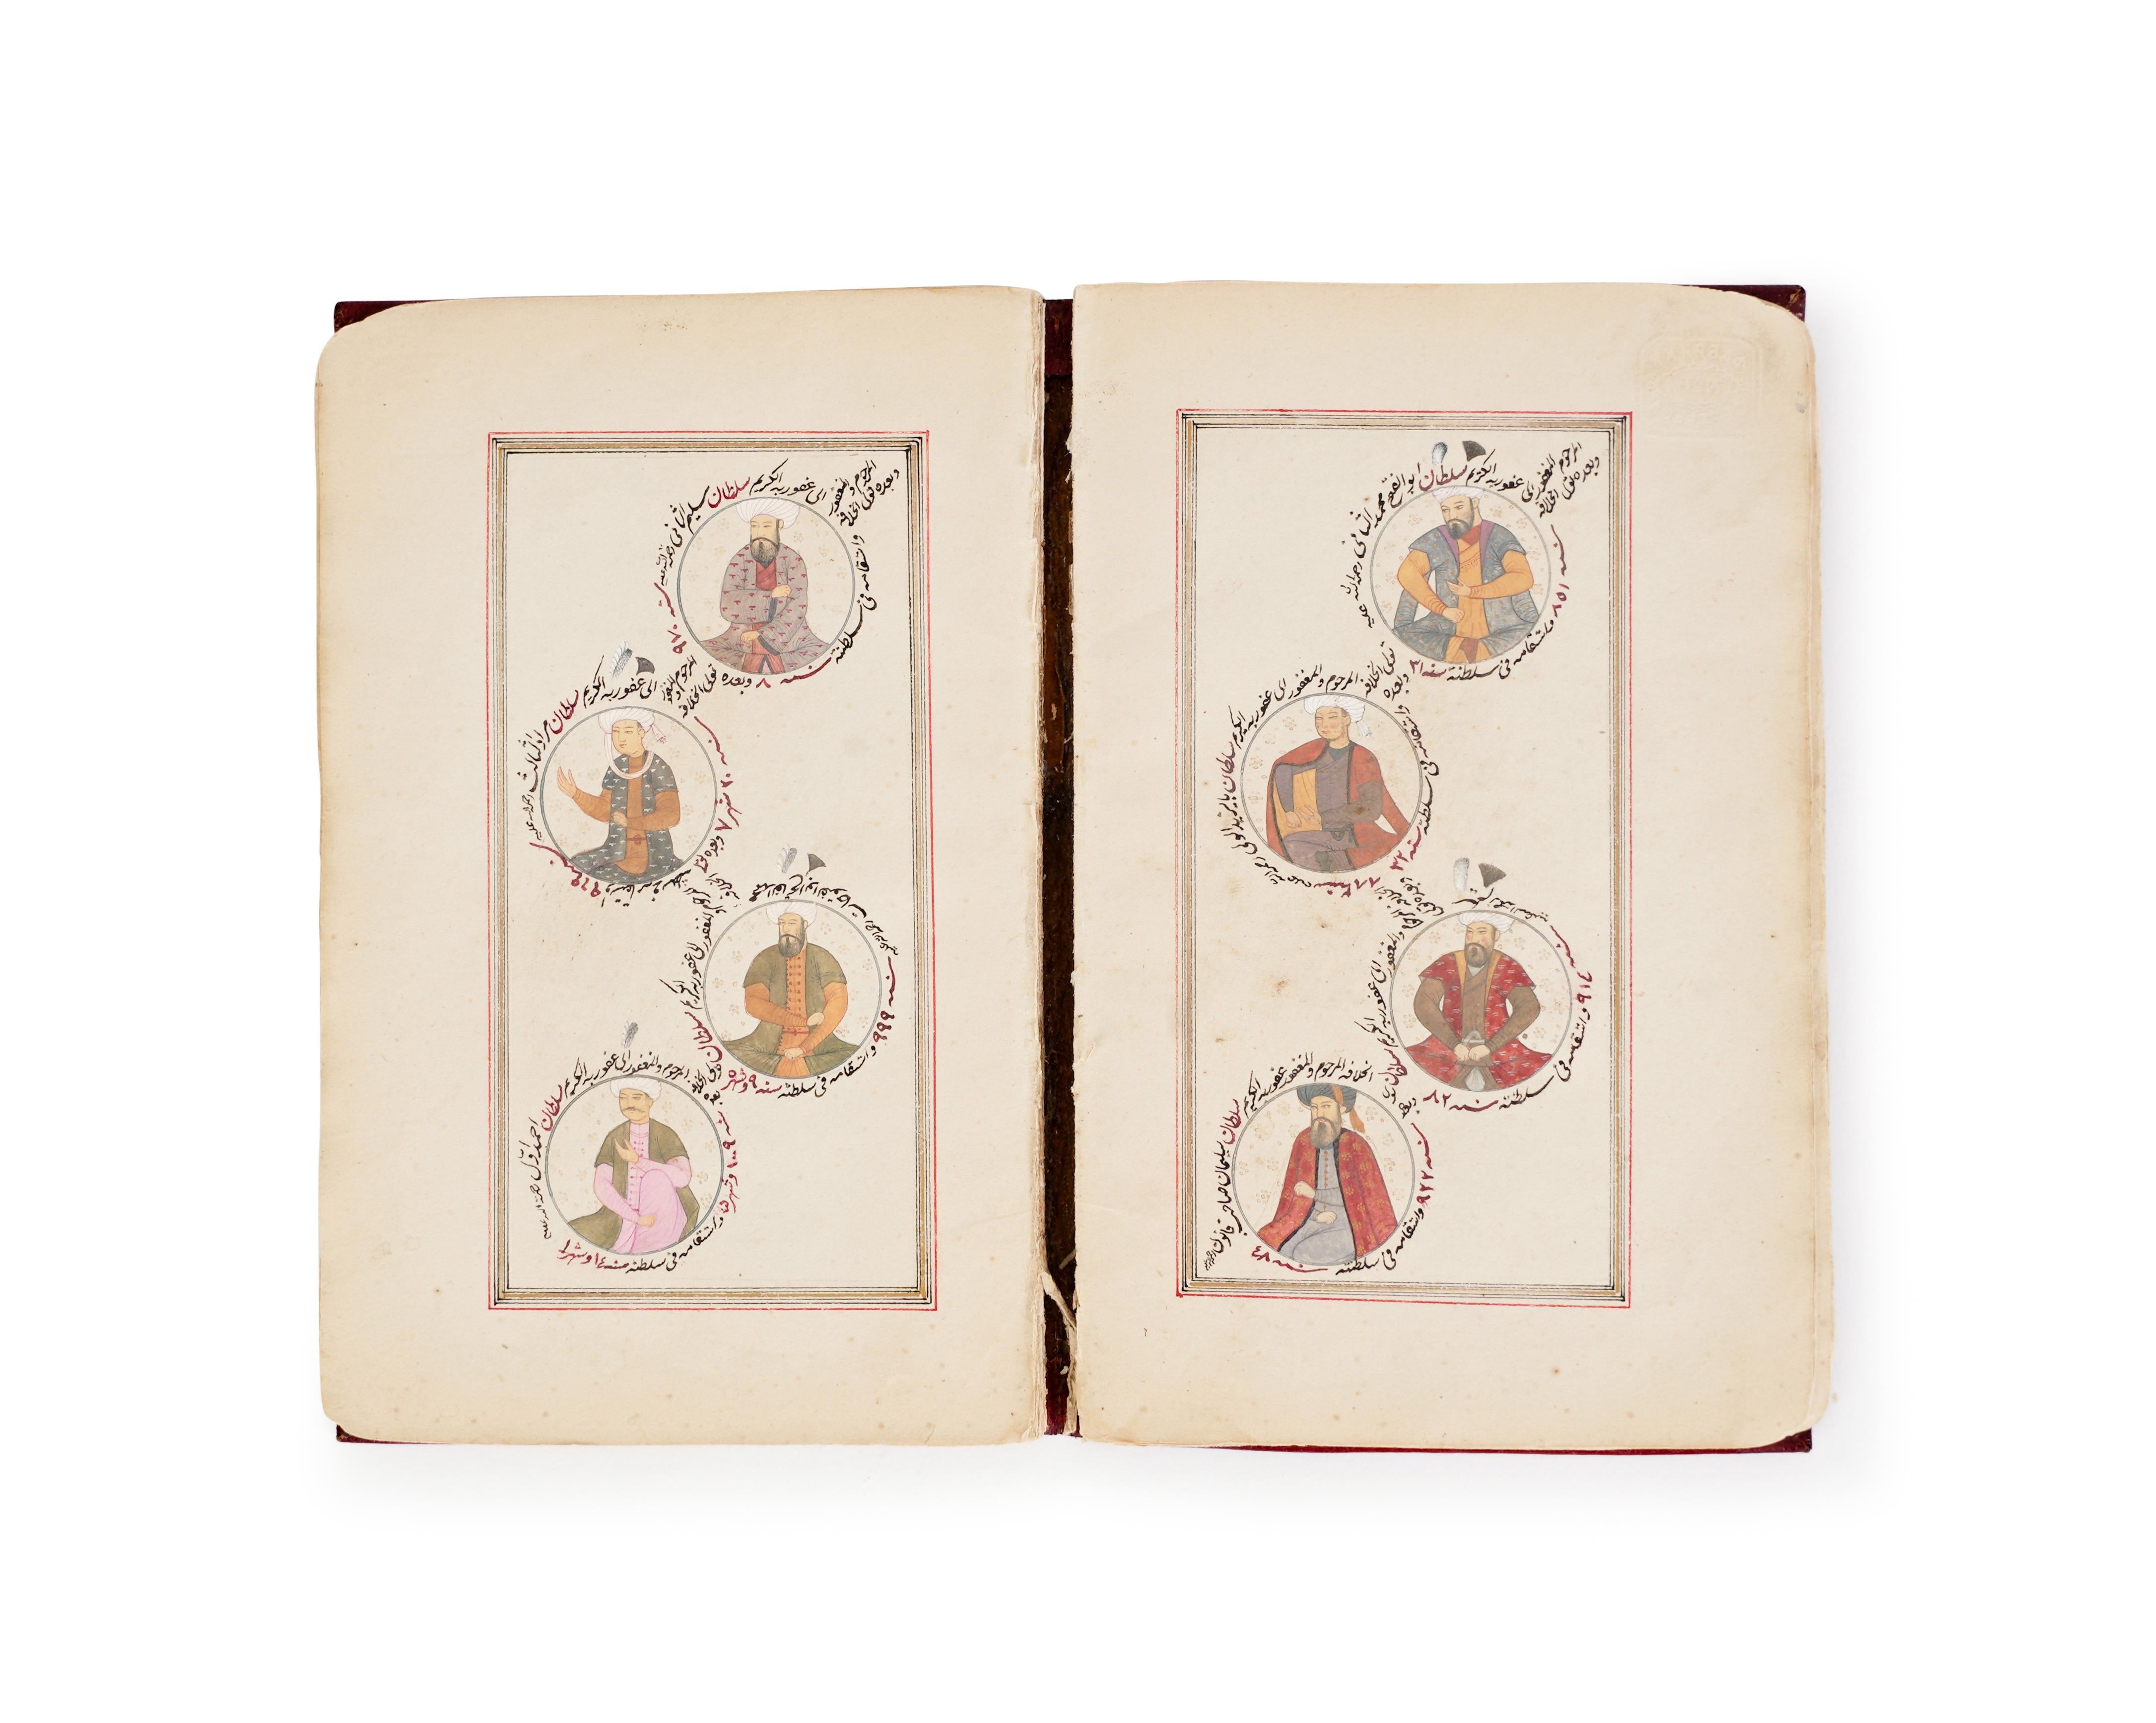 18th Century Book Depicting The Descendants Of The Rulers Of The Ottoman Empire In Good Condition For Sale In London, GB